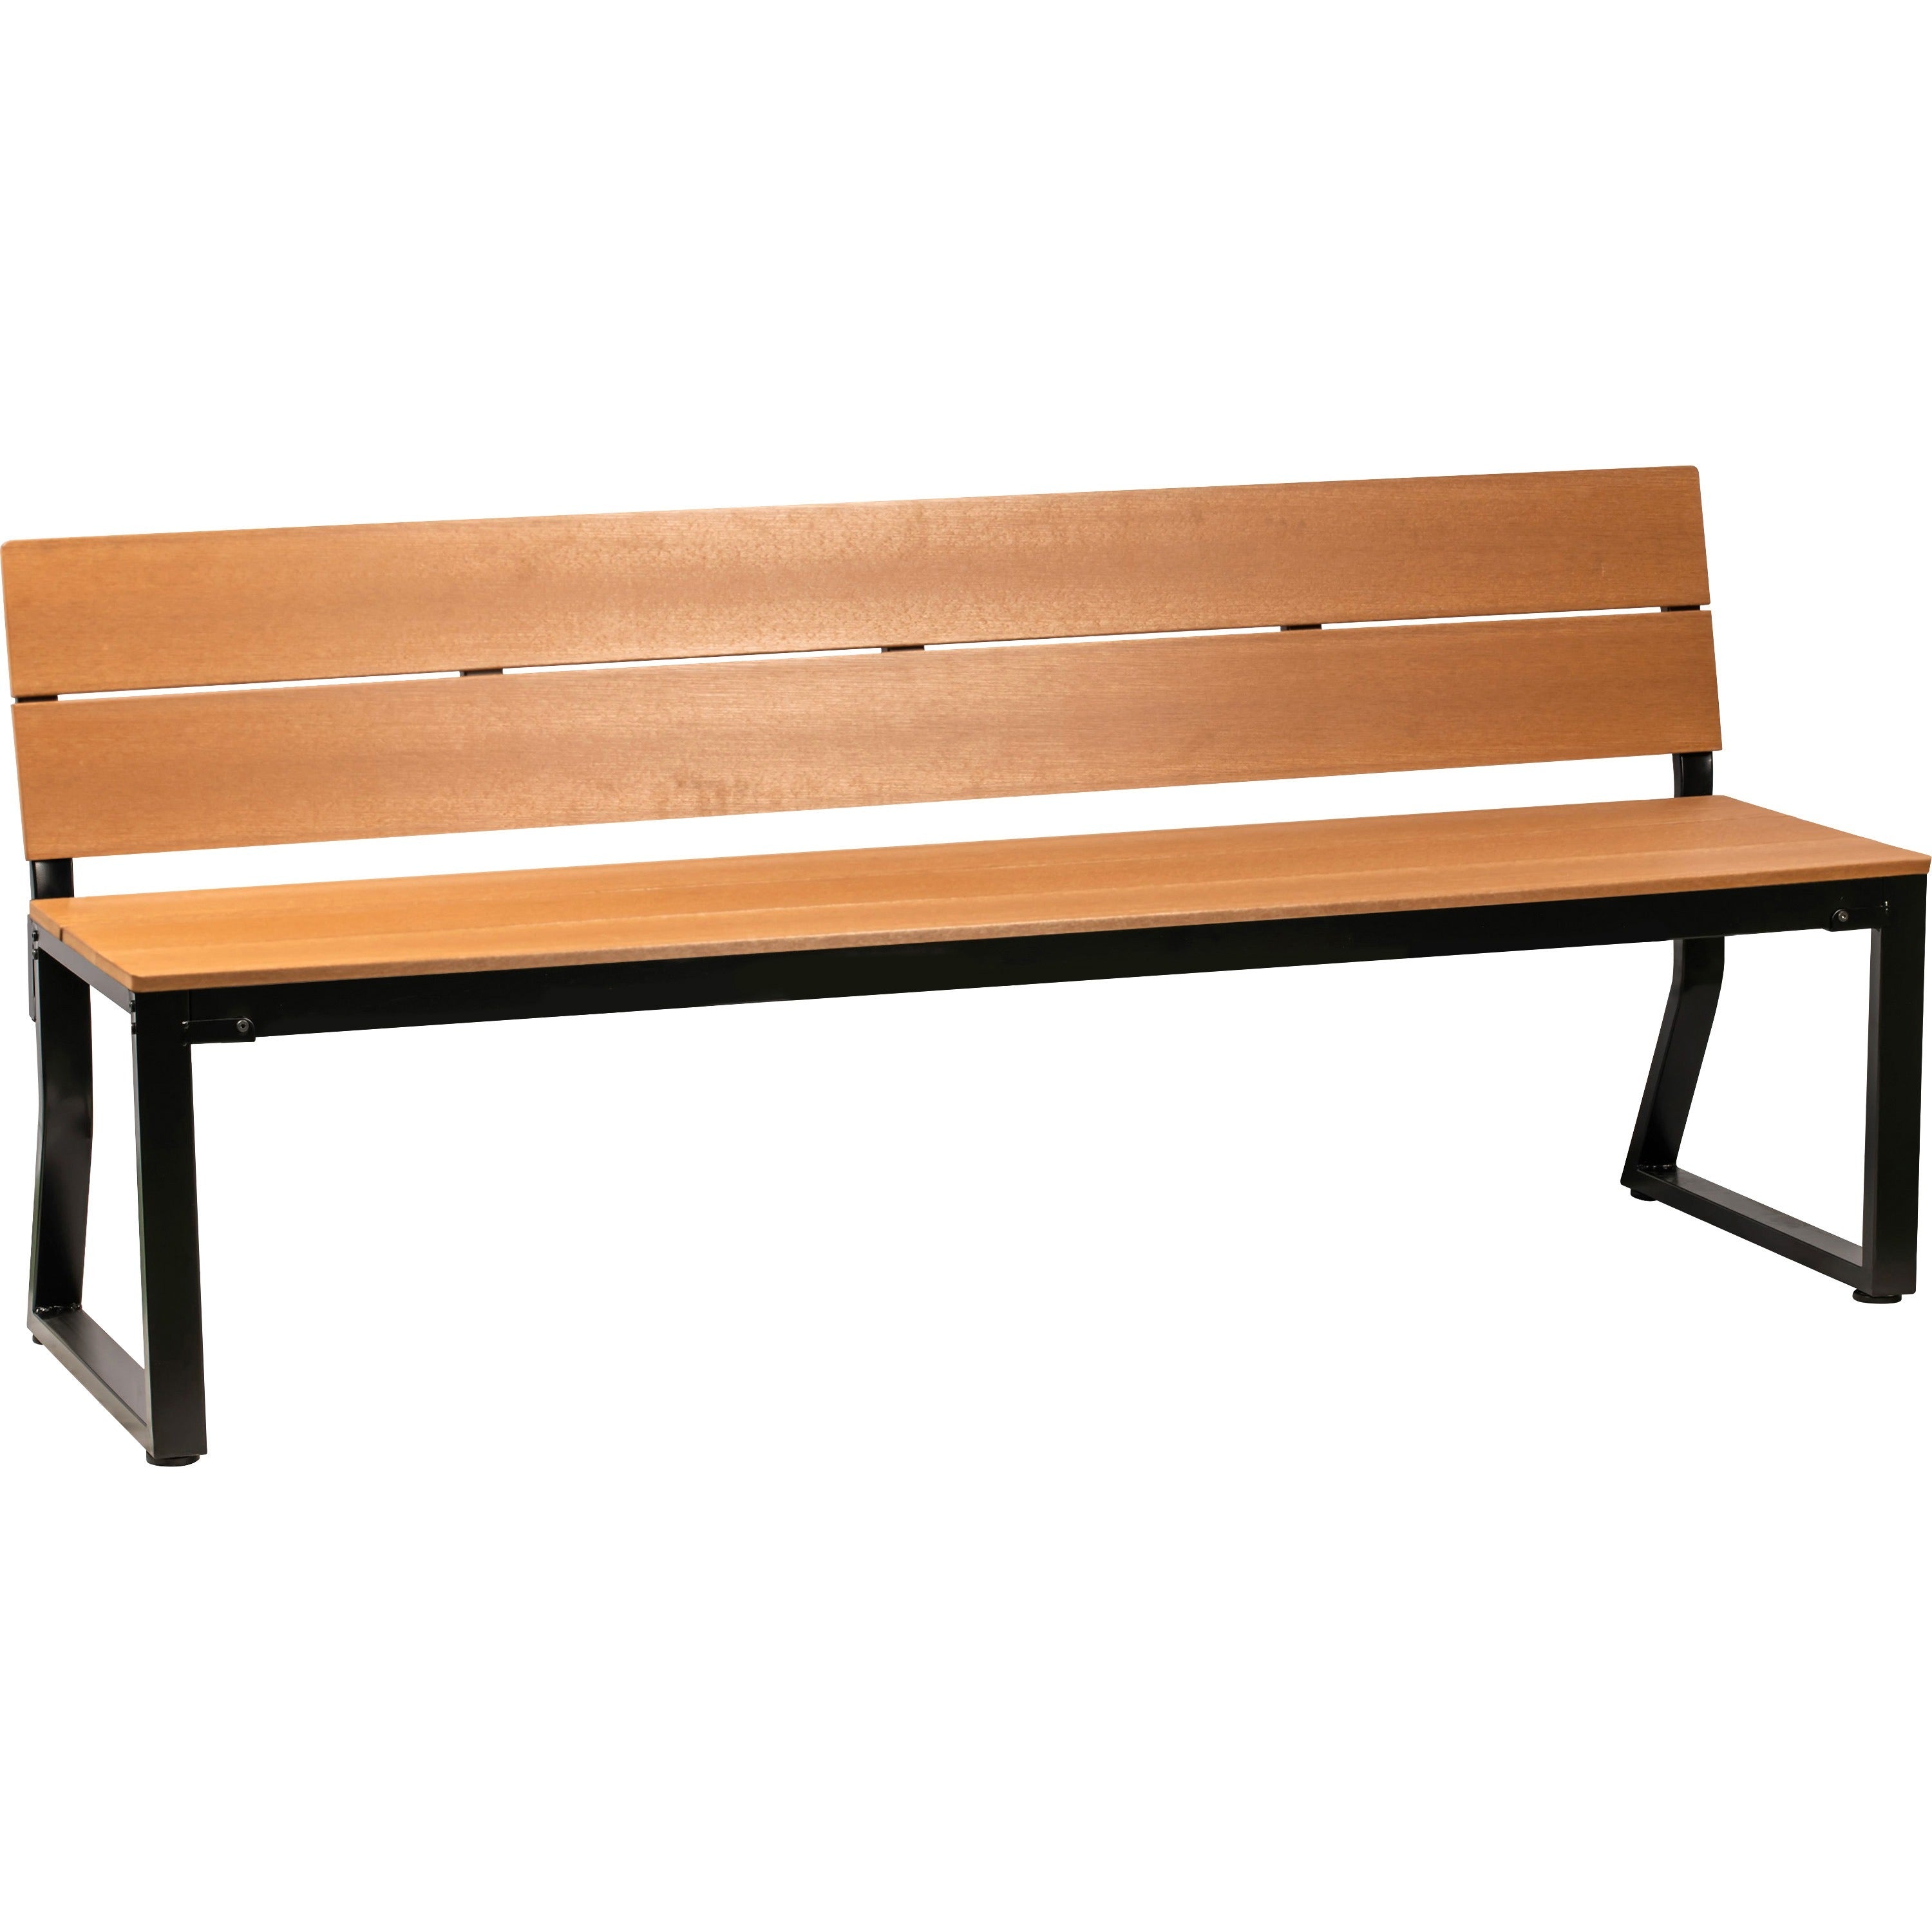 lorell-faux-wood-outdoor-bench-with-backrest-teak-faux-wood-seat-teak-faux-wood-back-1-each_llr42690 - 1